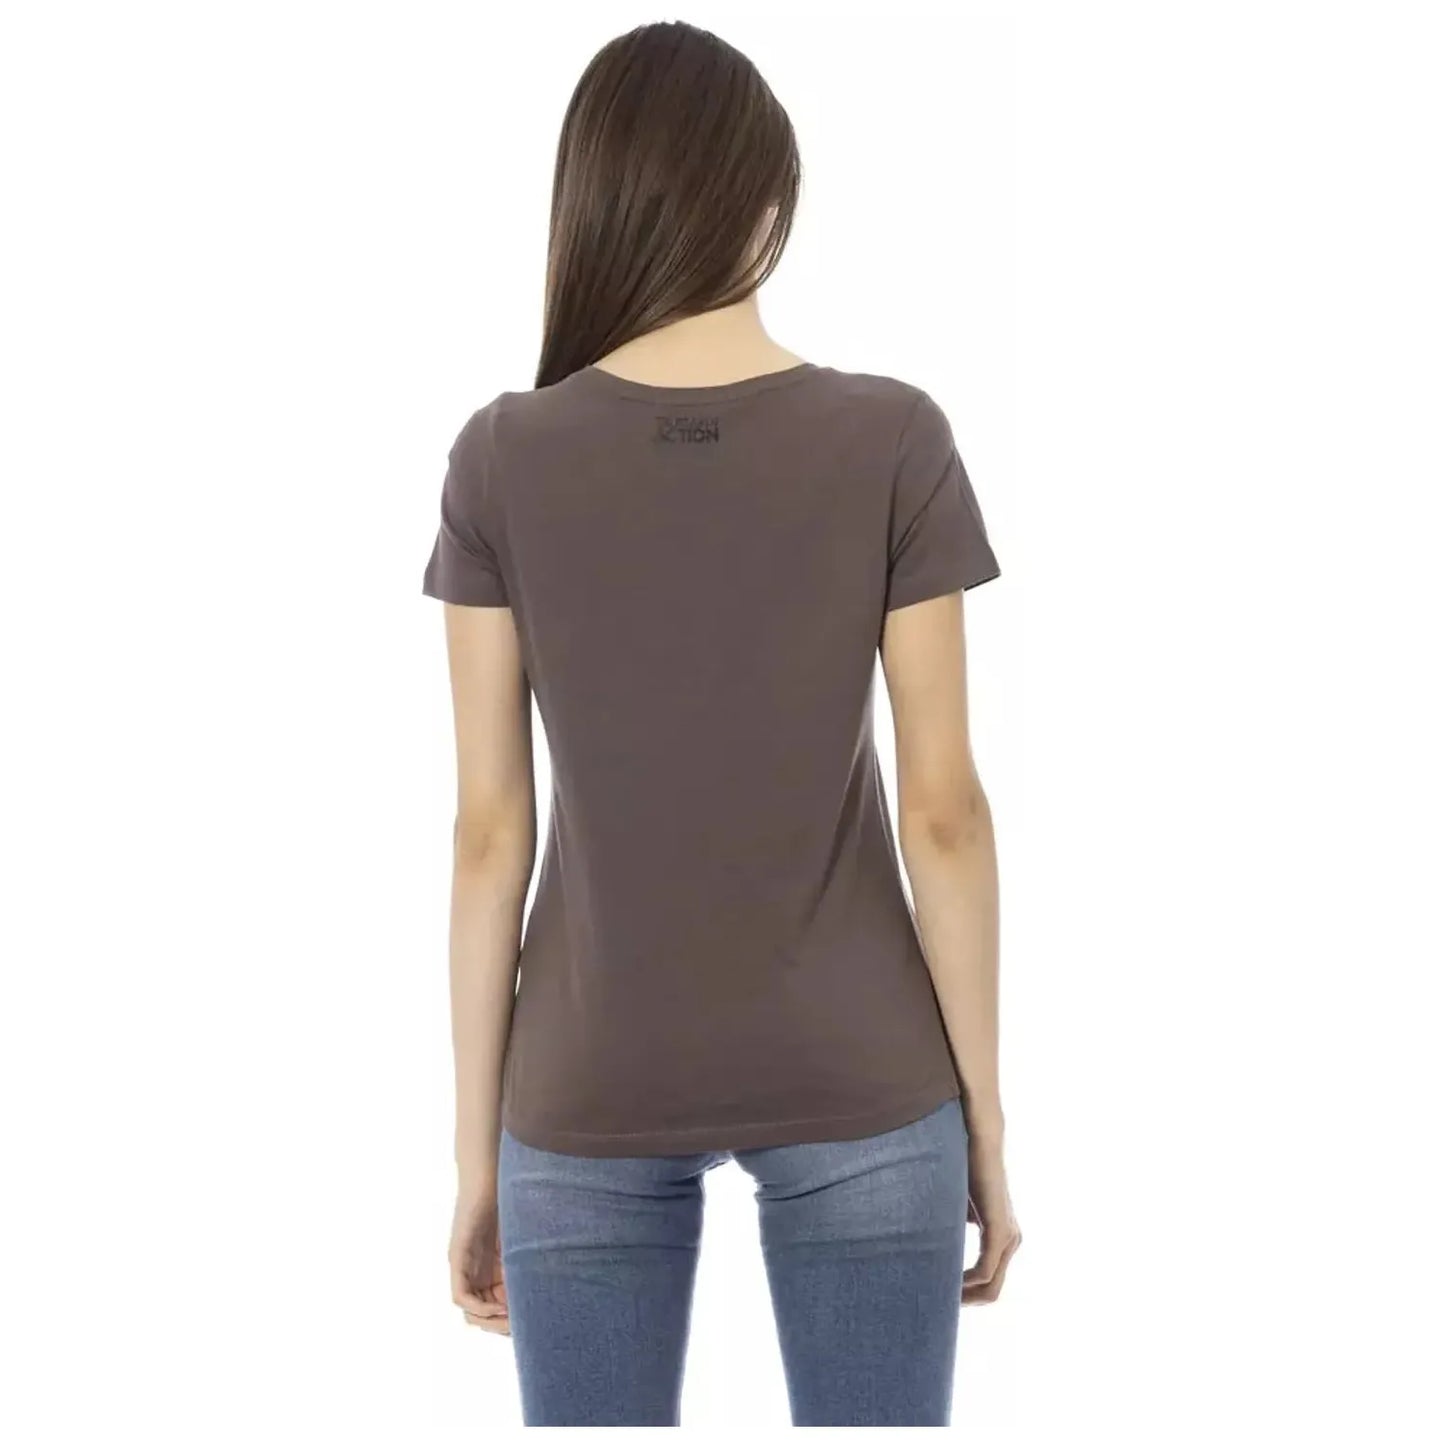 Trussardi Action Chic V-Neck Tee with Elegant Front Print brown-cotton-tops-t-shirt-1